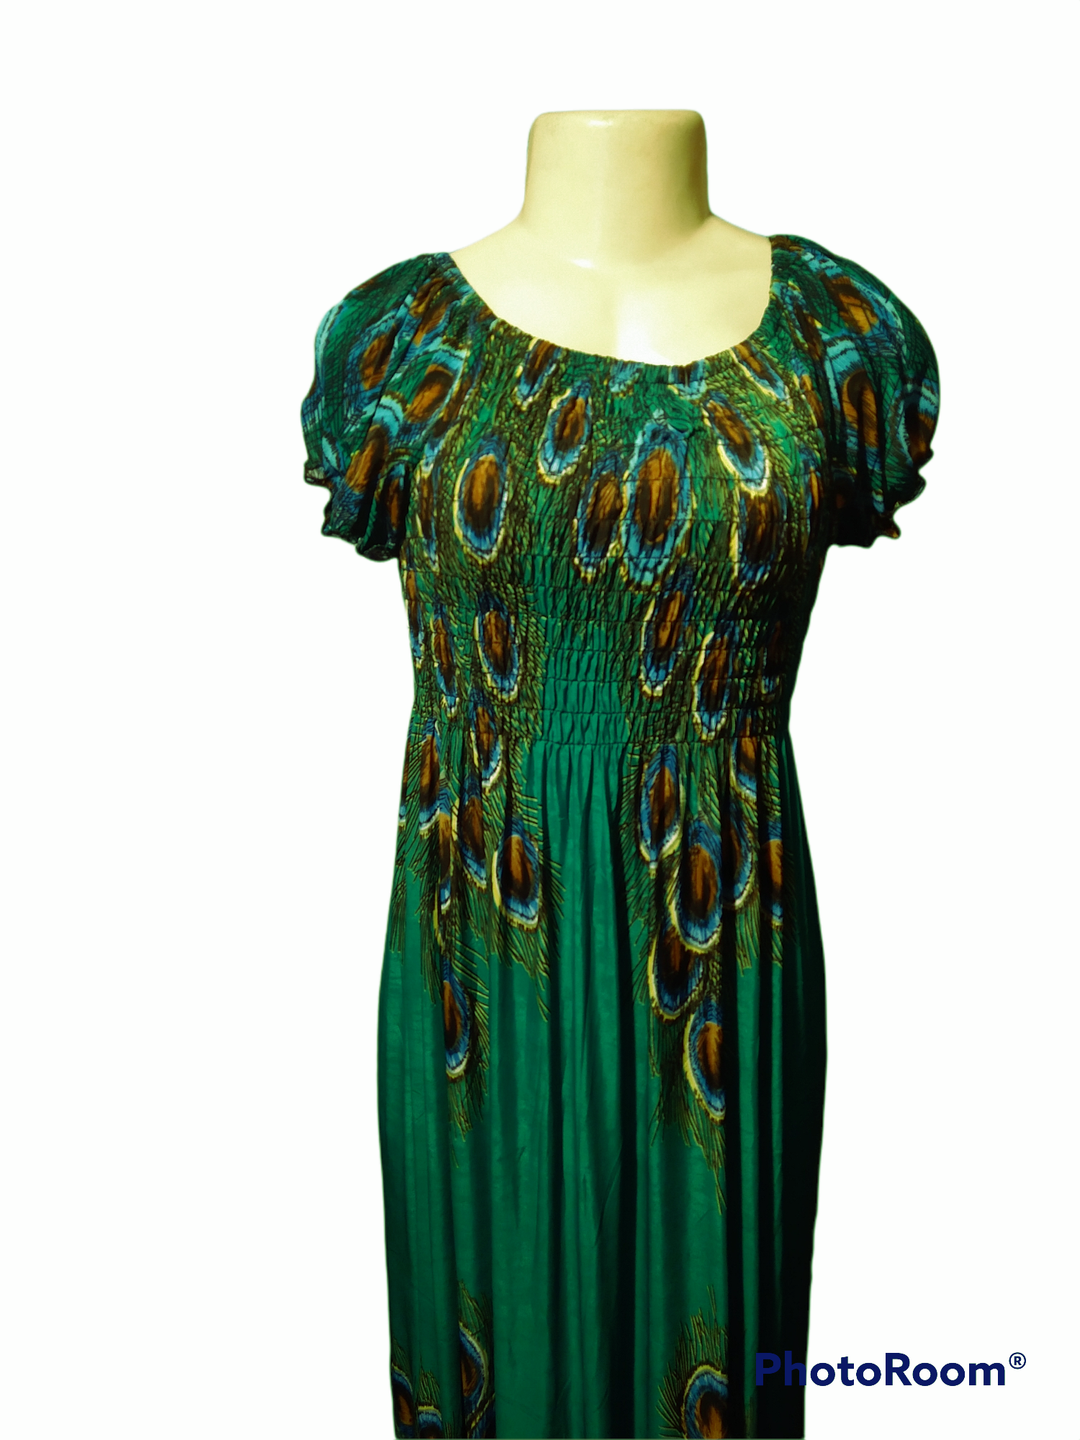 Green Peacock feathers Maxi dress XL - The Fix Clothing